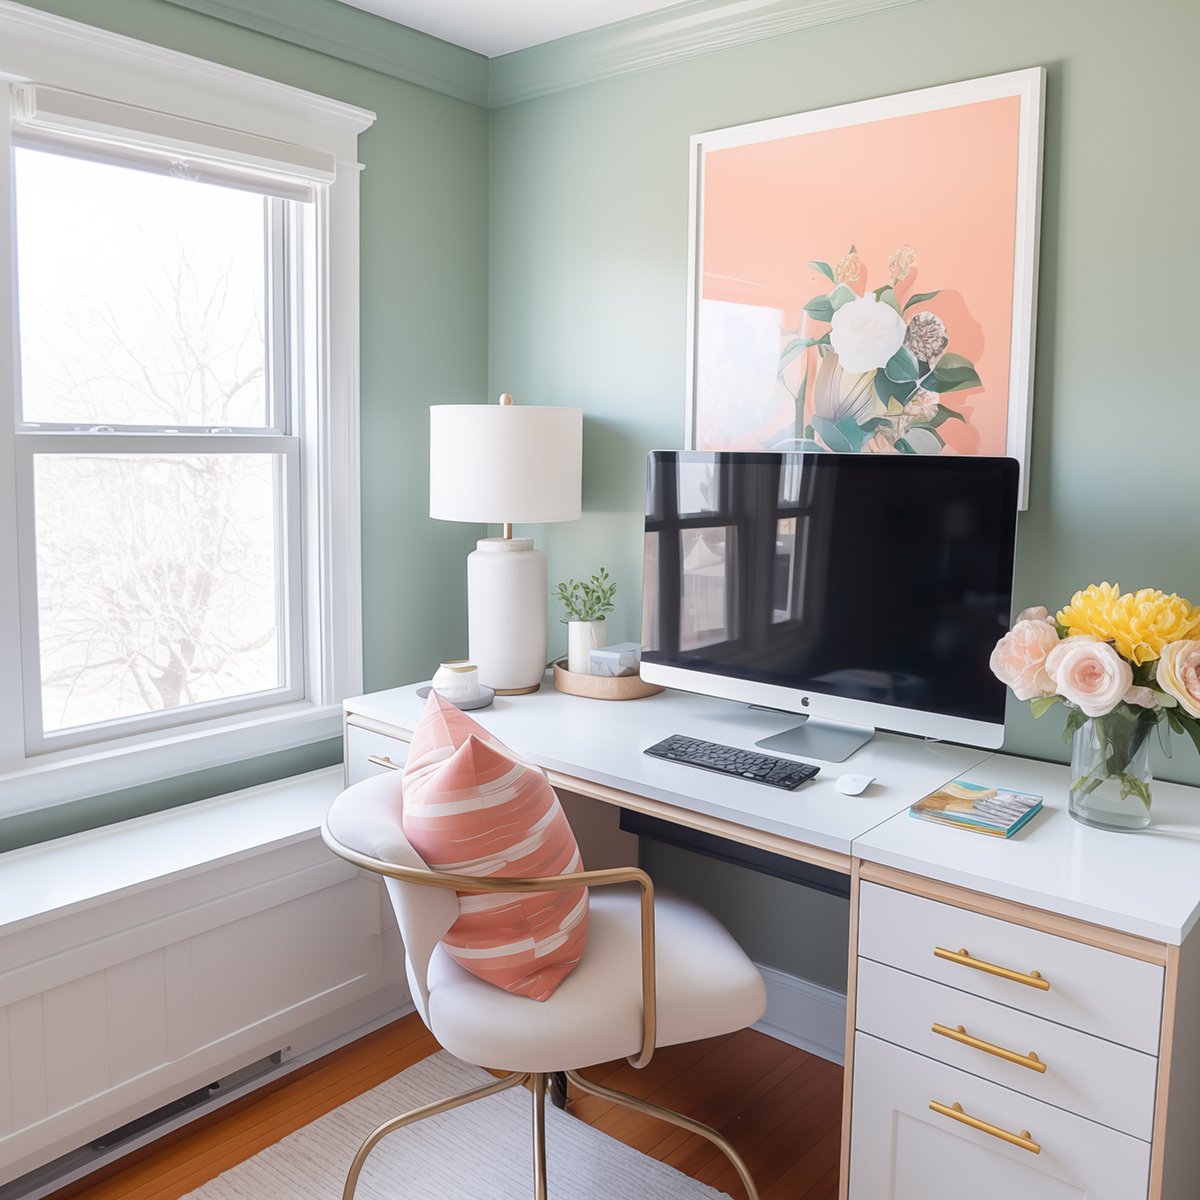 Chic home office with sage walls, white desk, gold accents, floral art, and a vibrant cushion.